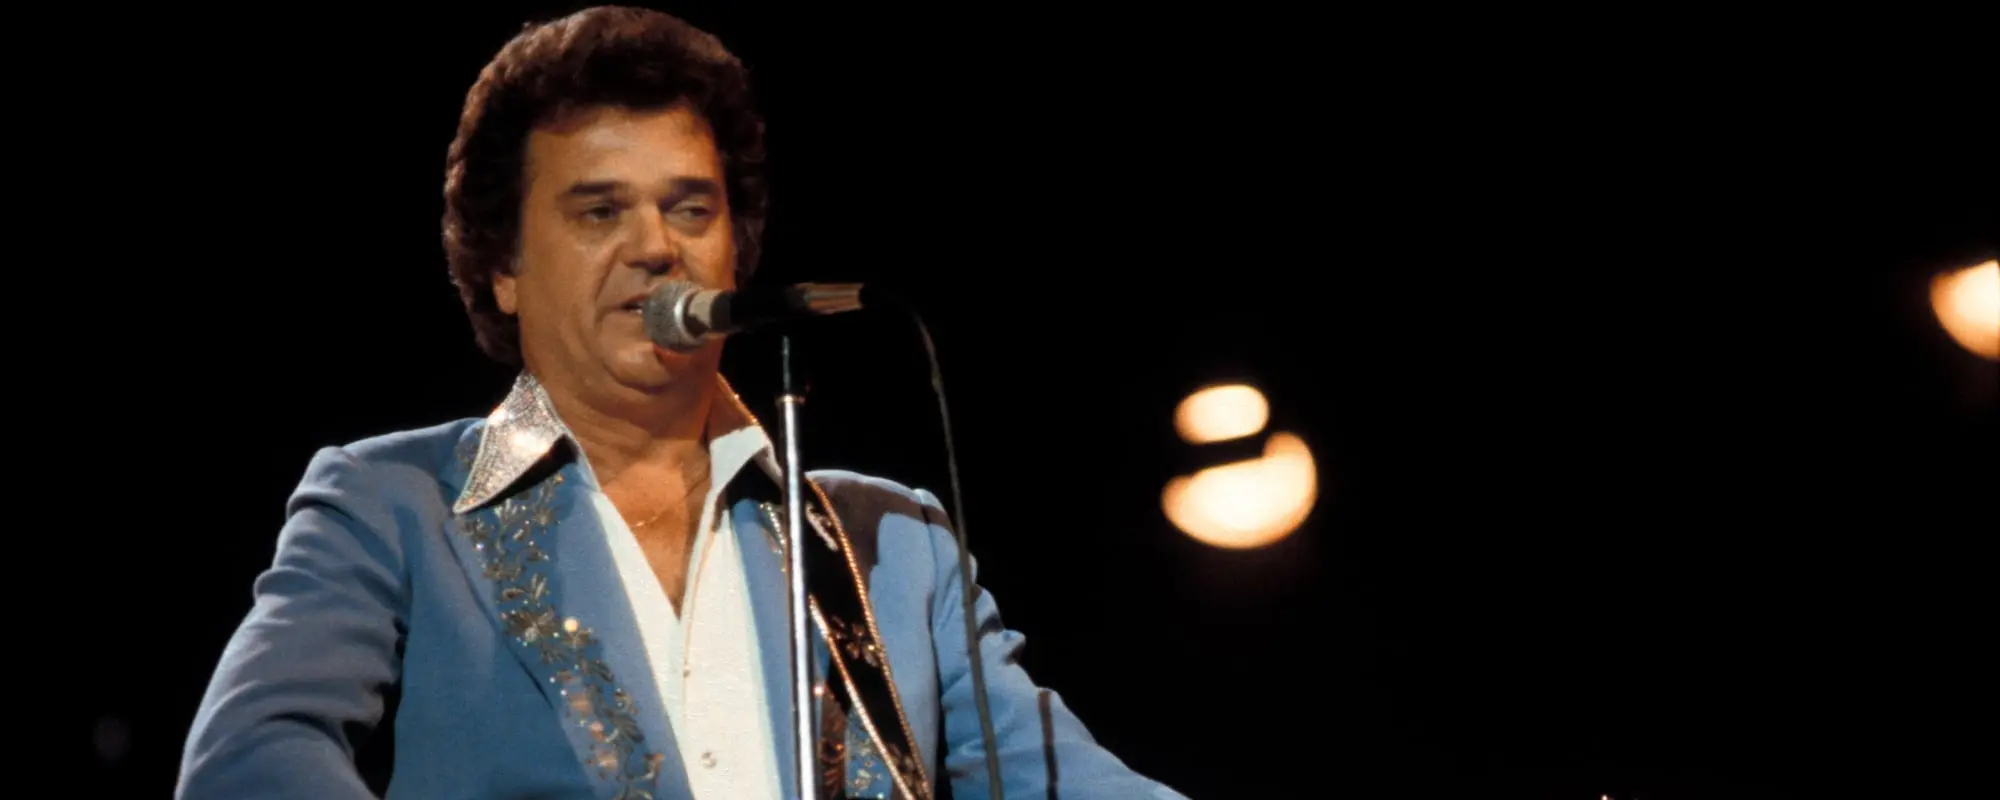 Final Decision Made on Possible Demolition of Conway Twitty’s Historic Tennessee Home Following Public Outcry